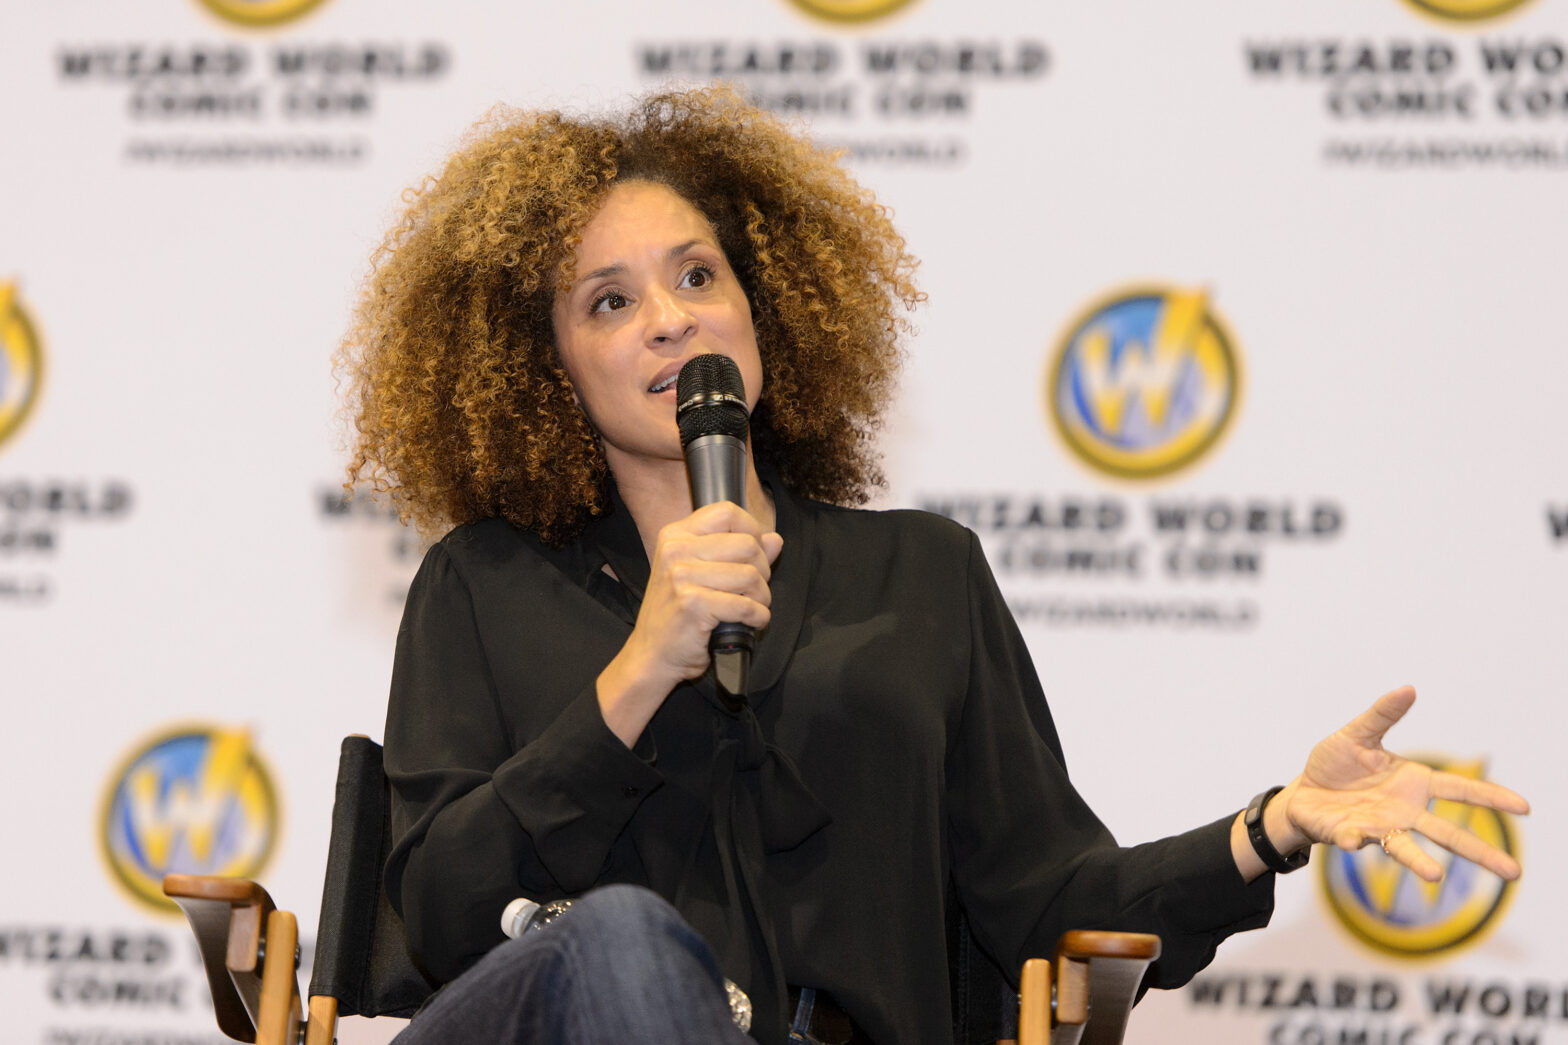 Karyn Parsons attends Wizard World Comic Con Fan Fest Chicago at Donald E. Stephens Convention Center on March 7, 2015 in Chicago, Illinois.